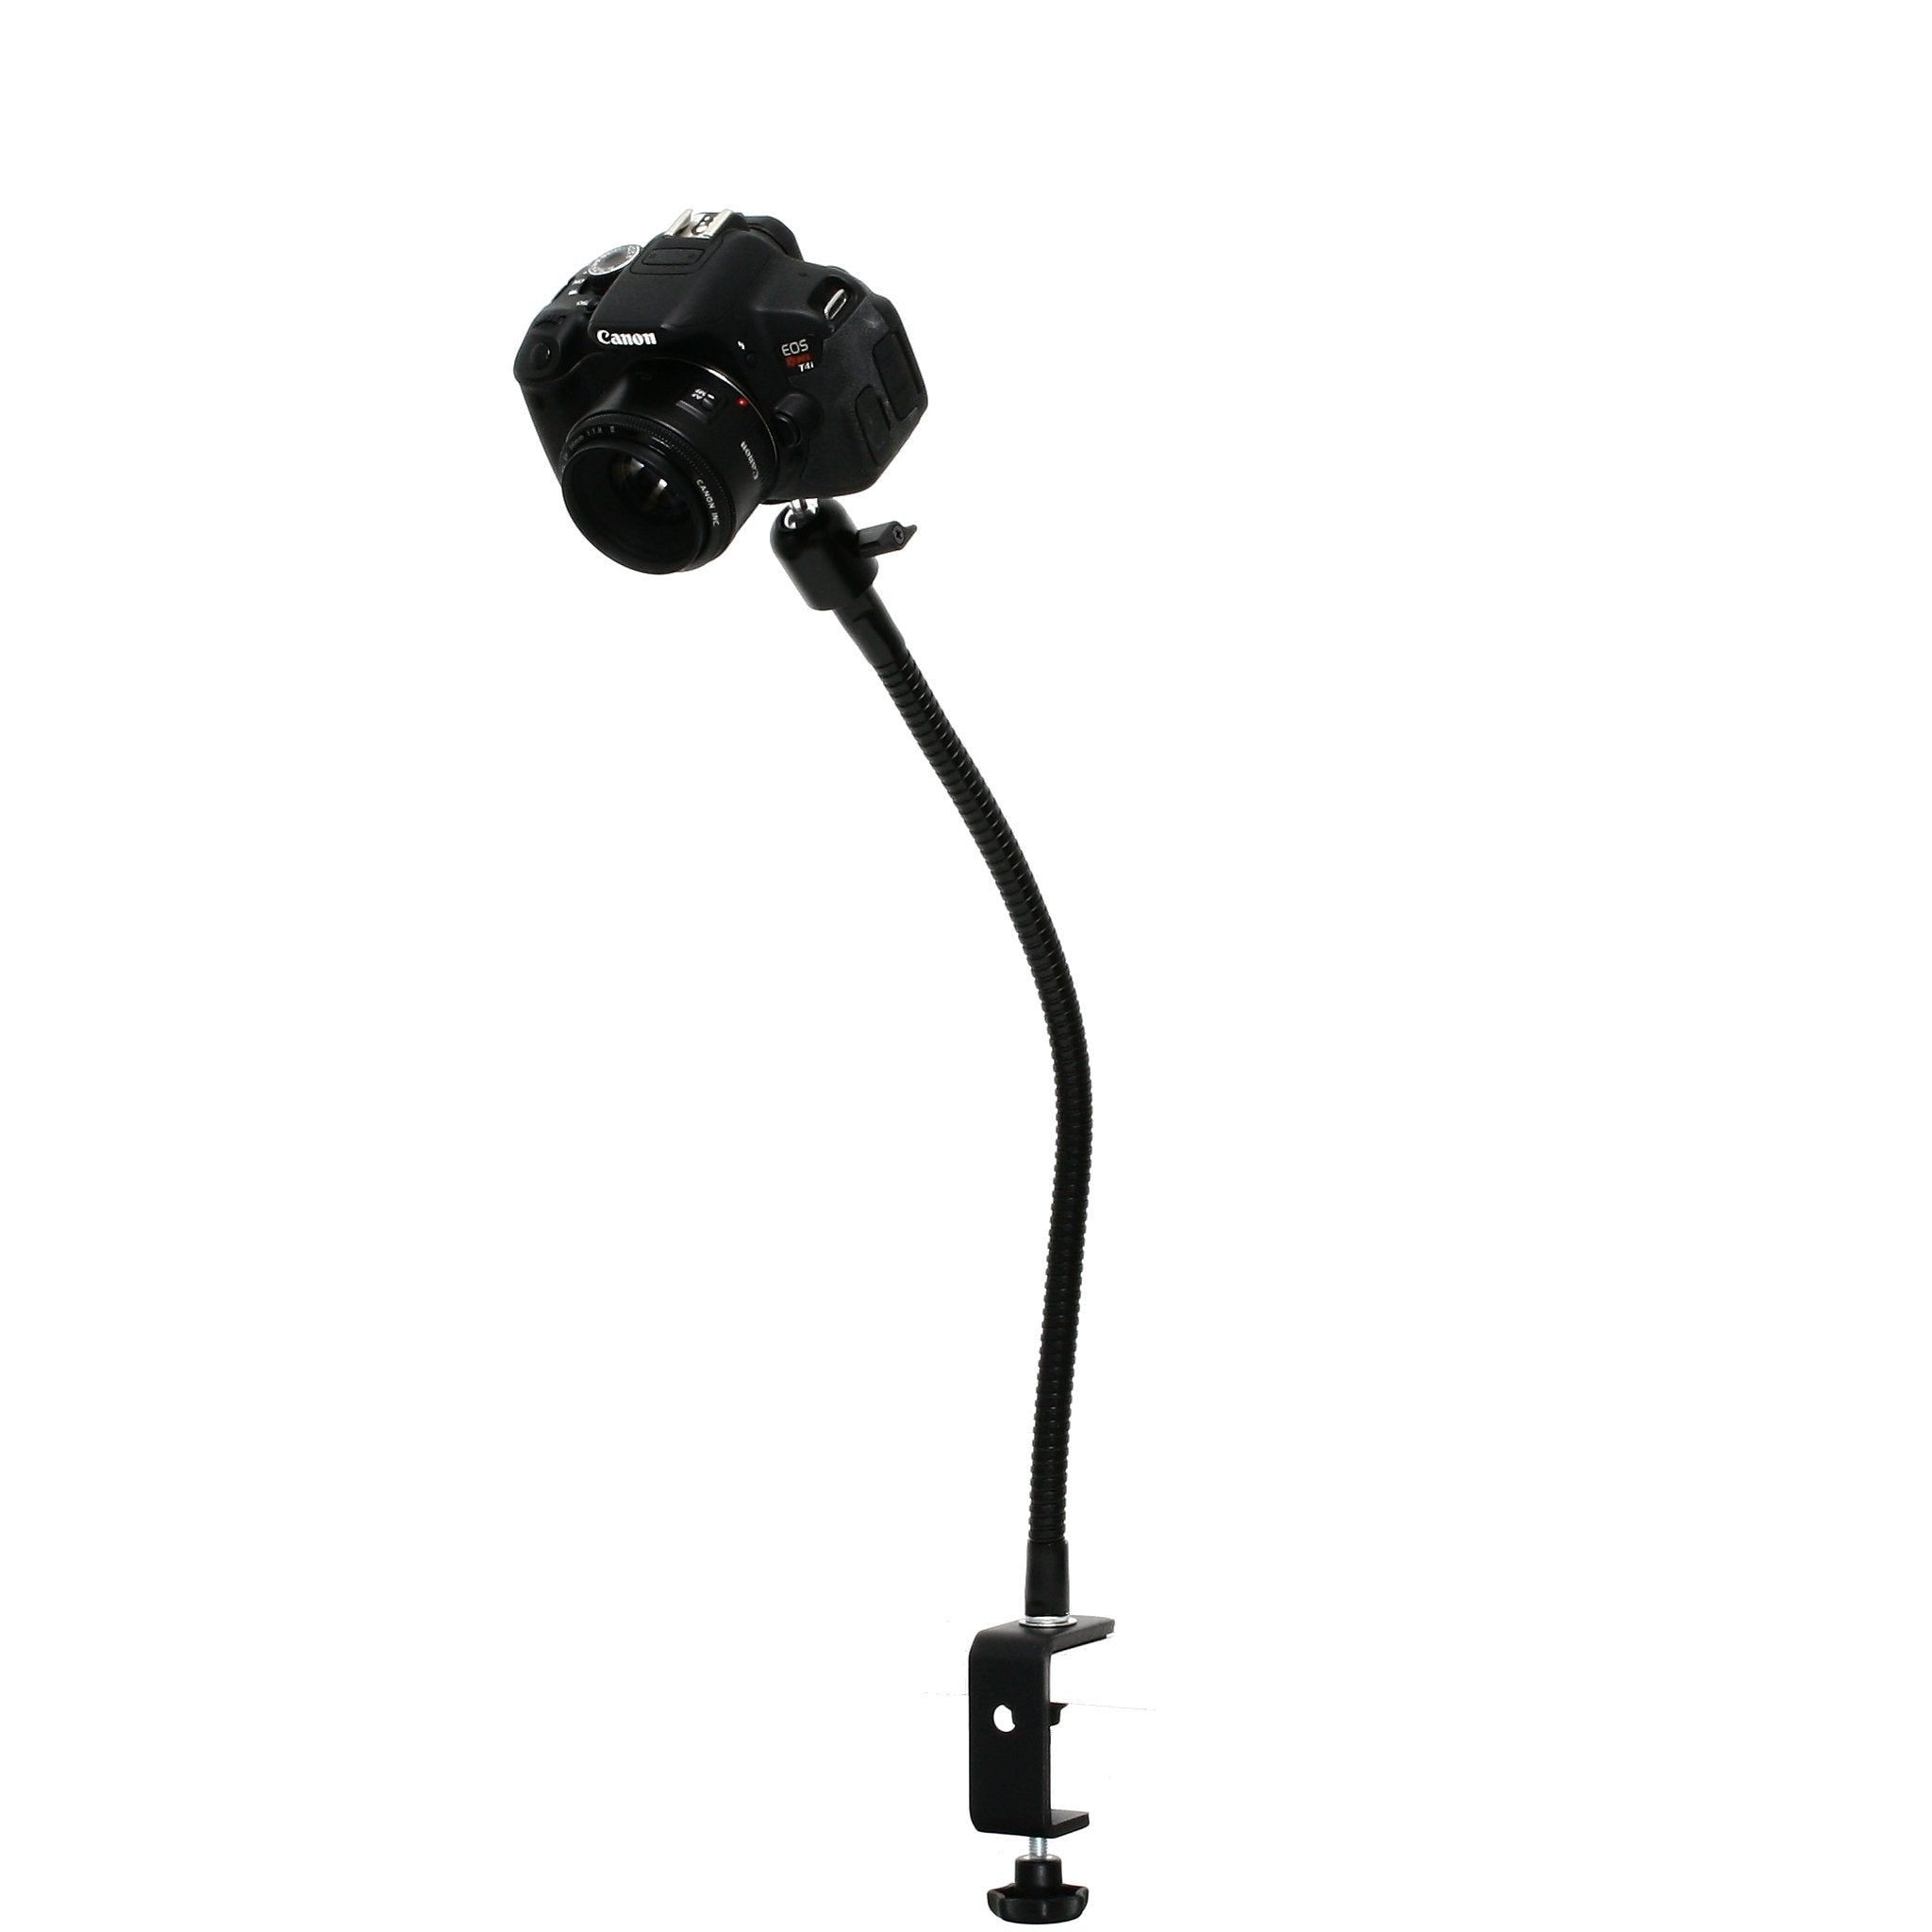 SnakeClamp 13 Flexible Arm Webcam Stand with Plate Mount